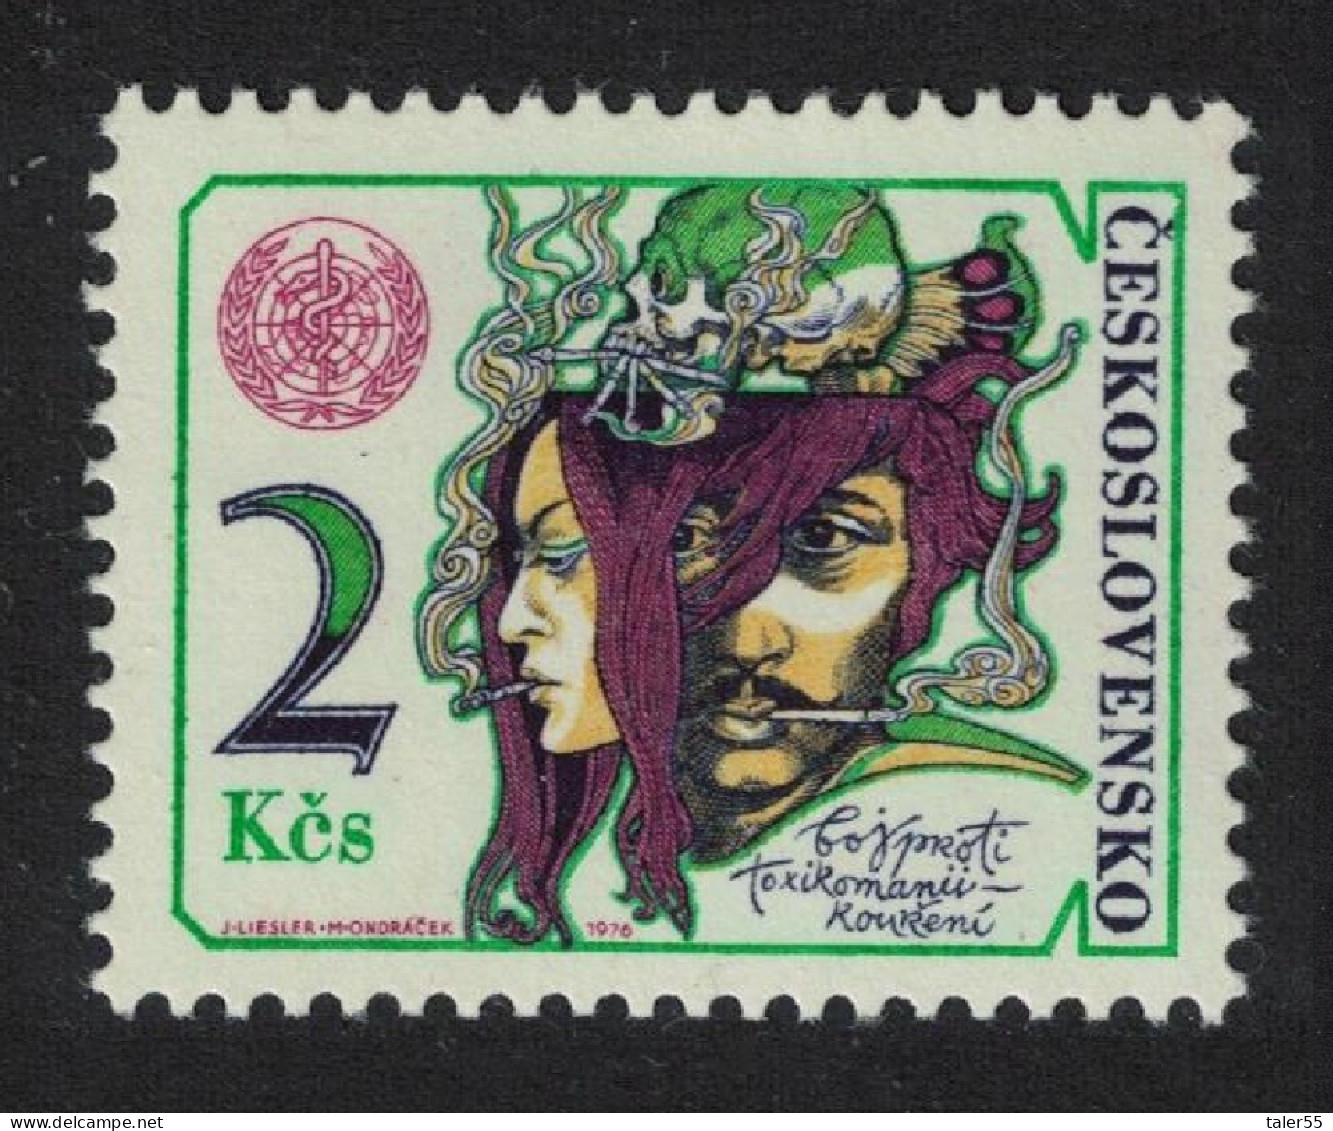 Czechoslovakia WHO Campaign Against Smoking 1976 MNH SG#2301 - Unused Stamps